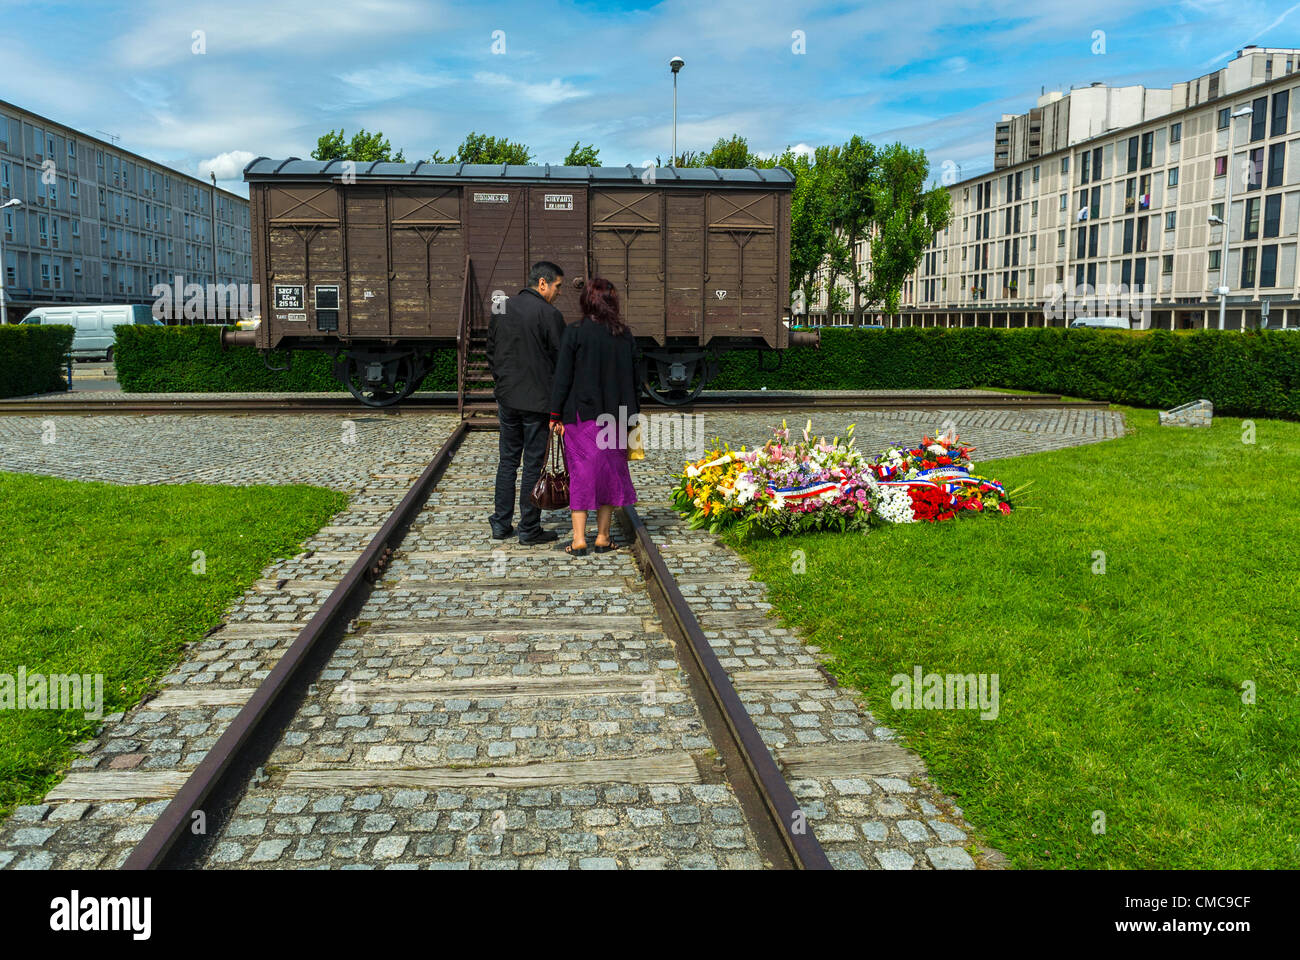 Drancy, France, Shoah Memorial in Suburbs, Camp Drancy, Holding Place, Where in WWII, Nazi Deportations of Jews and other Foreigners, 1941, to German Death Camps, took place, Couple Visiting Memorial Train, discrimination, history jews france, holocaust jews wwii, deportation trains Stock Photo